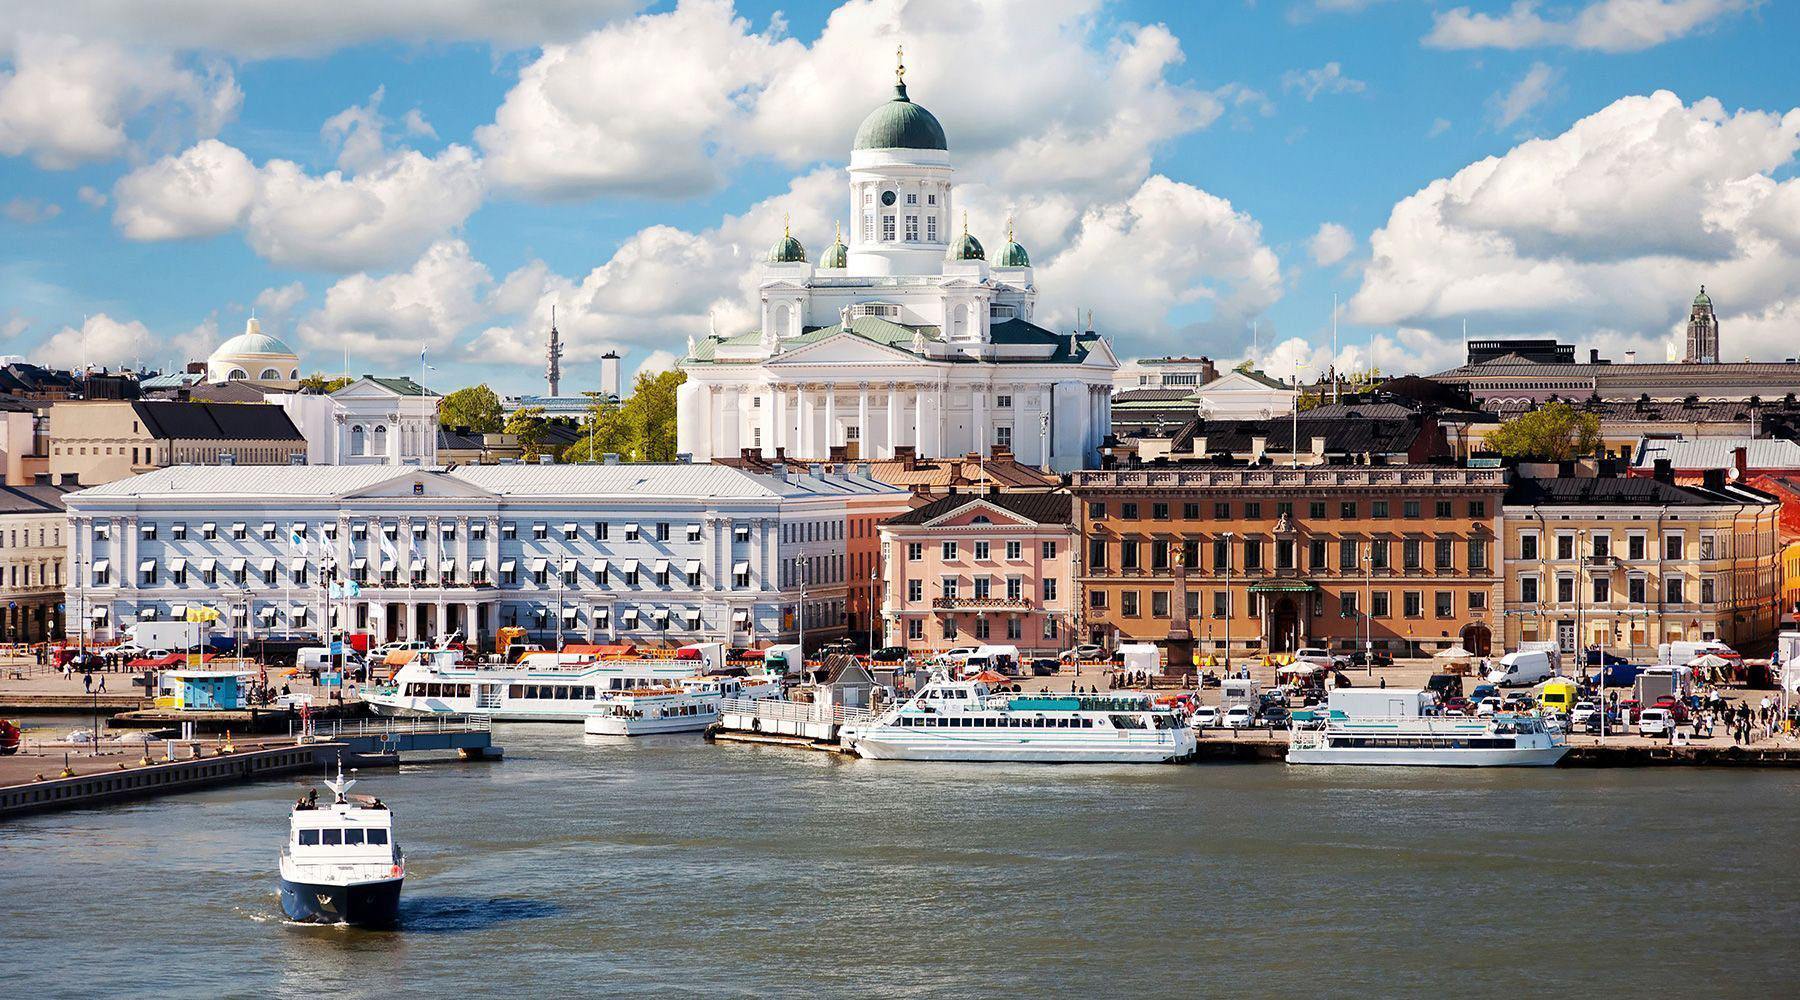 Cold War Facts - helsinki cathedral - Home!